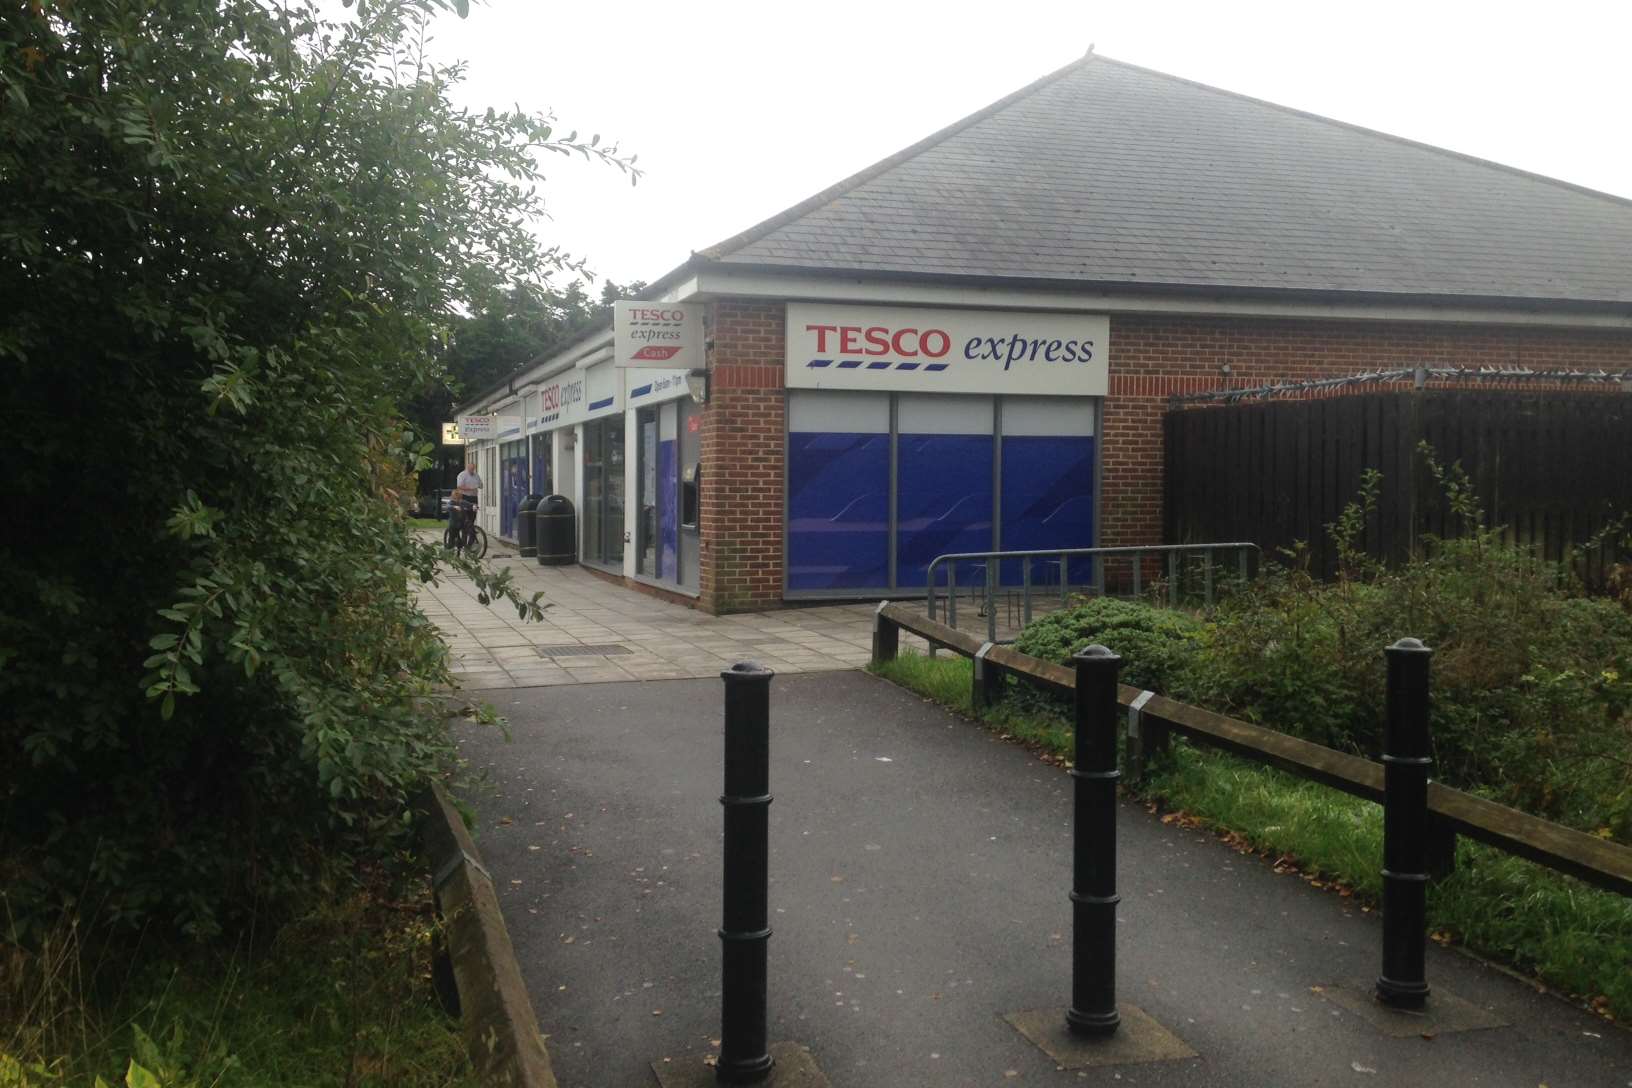 Police were called to the shop after reports of man was found in a bush